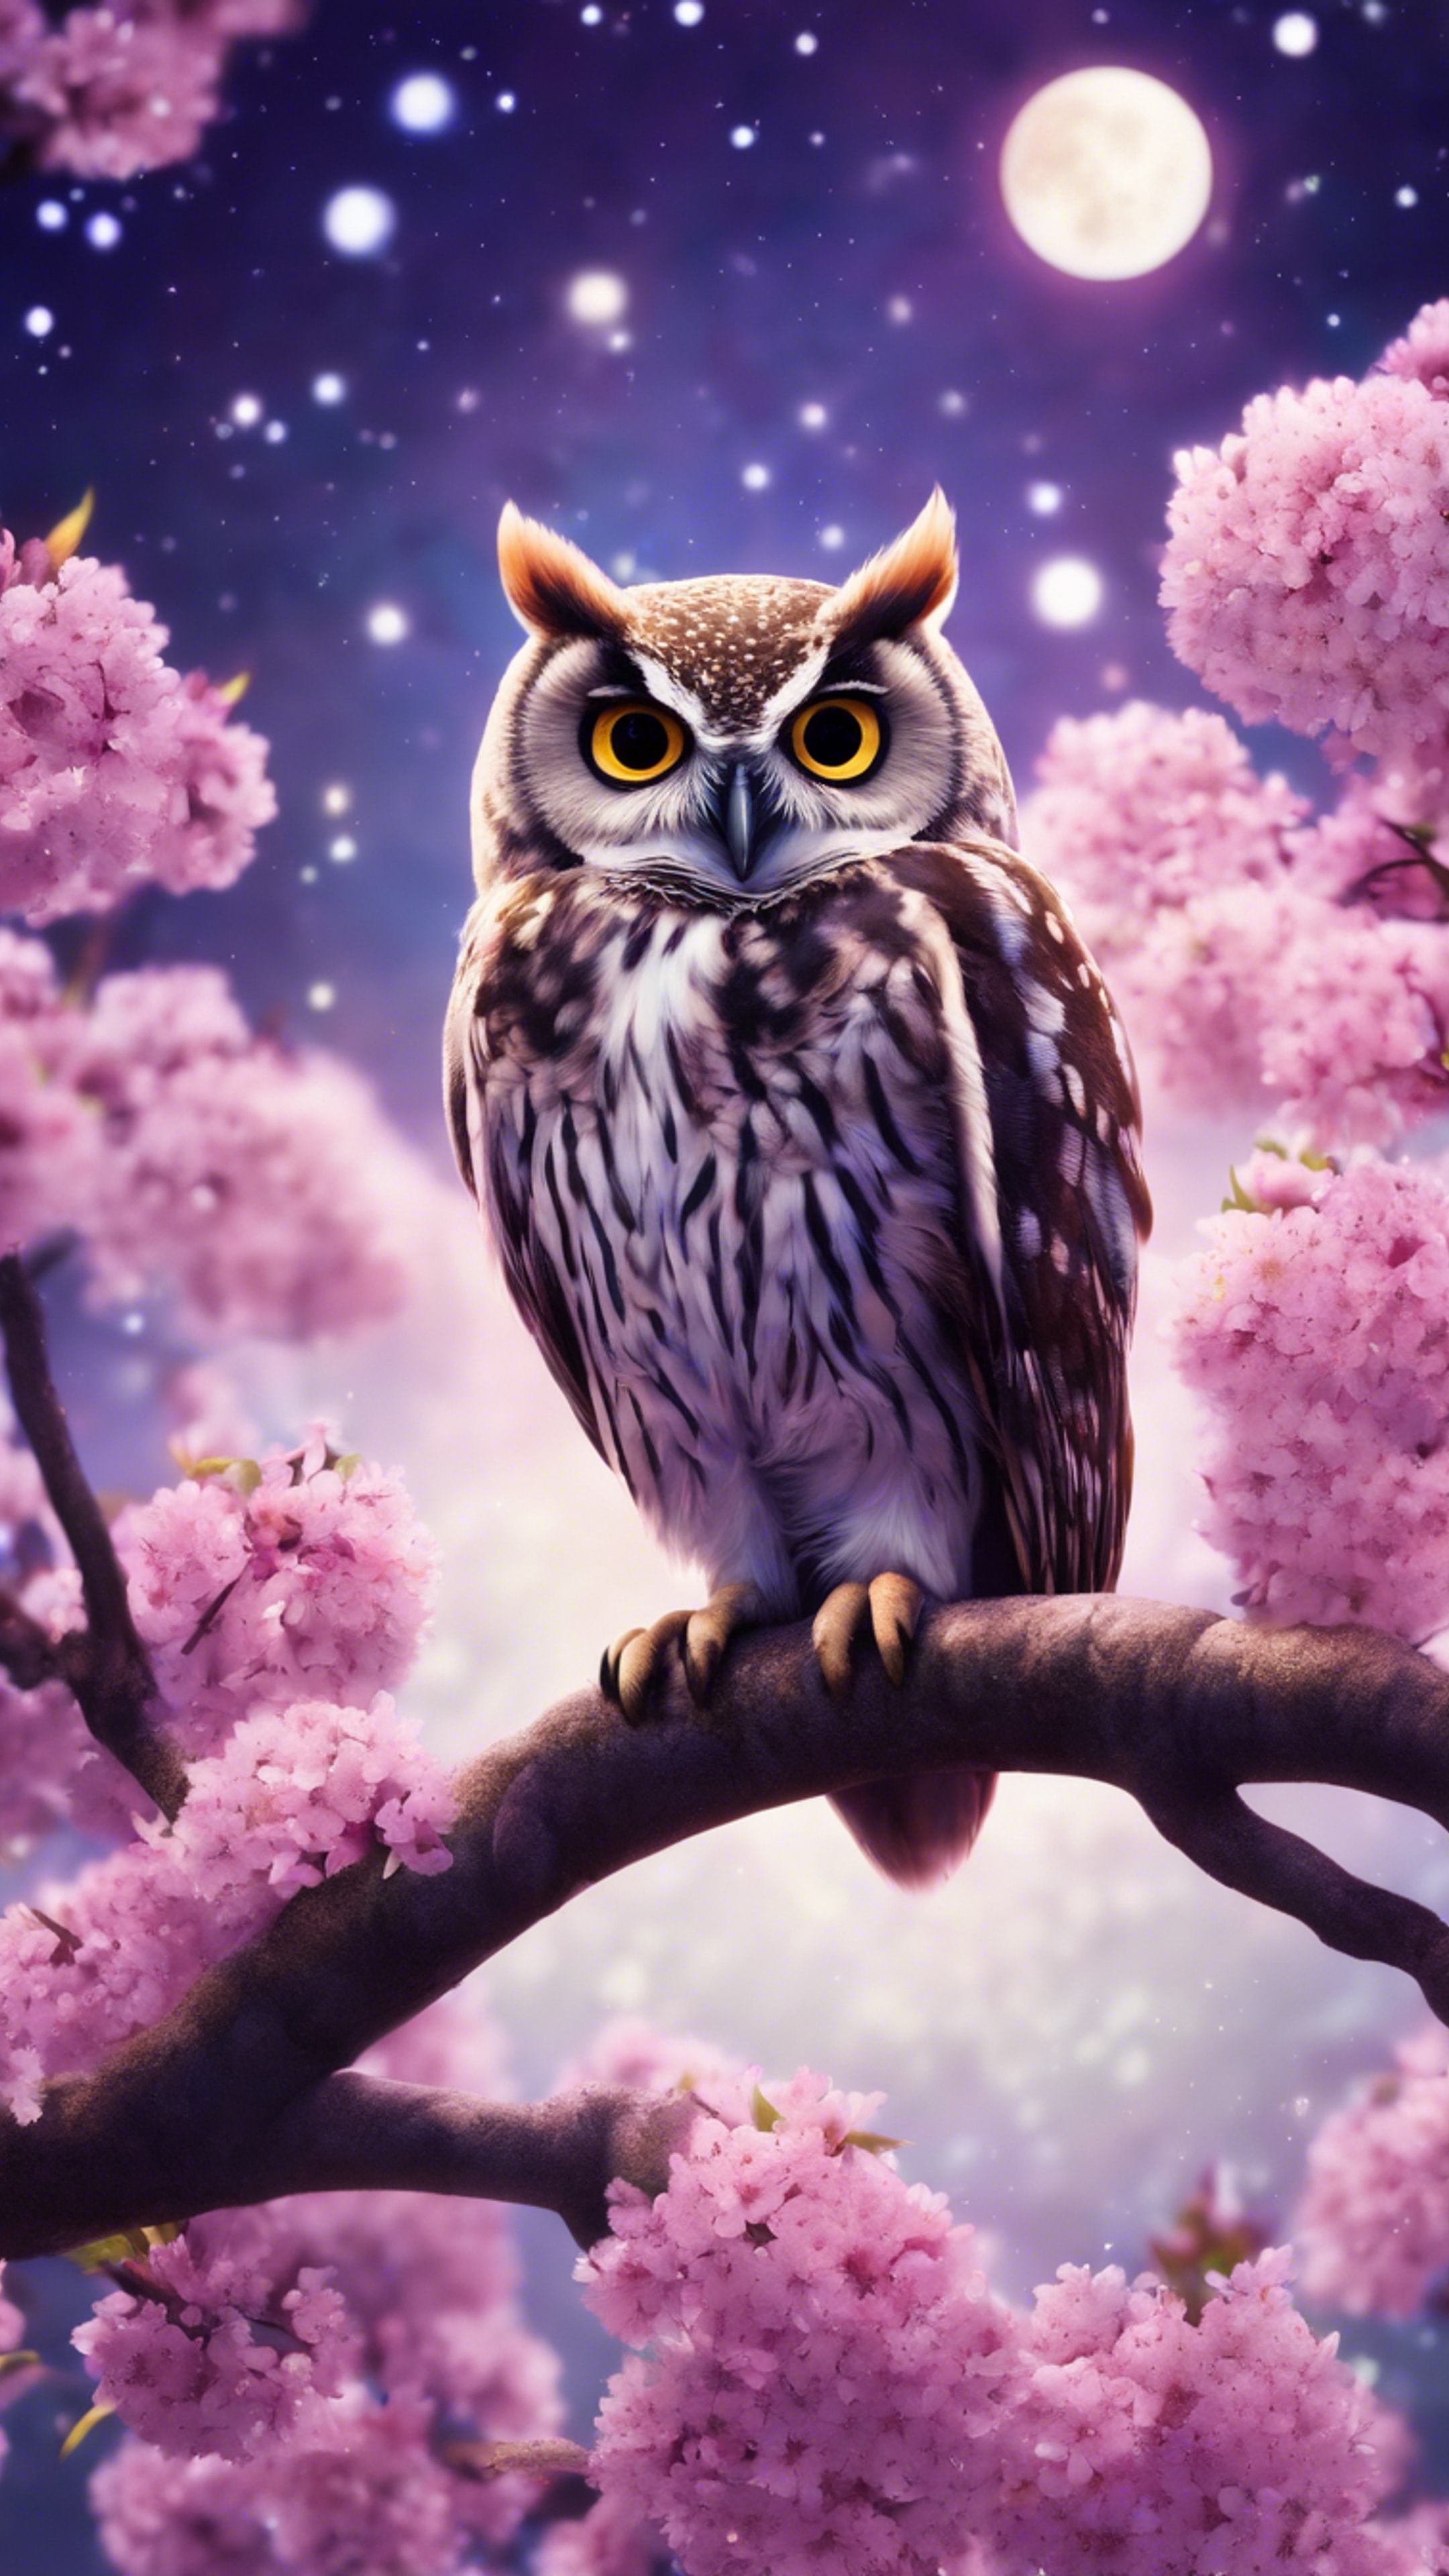 A cute kawaii style owl perched on a cherry blossom tree that blooms vibrant purple flowers, under a moonlit starry night. วอลล์เปเปอร์[d4c437875b7e43ac9353]